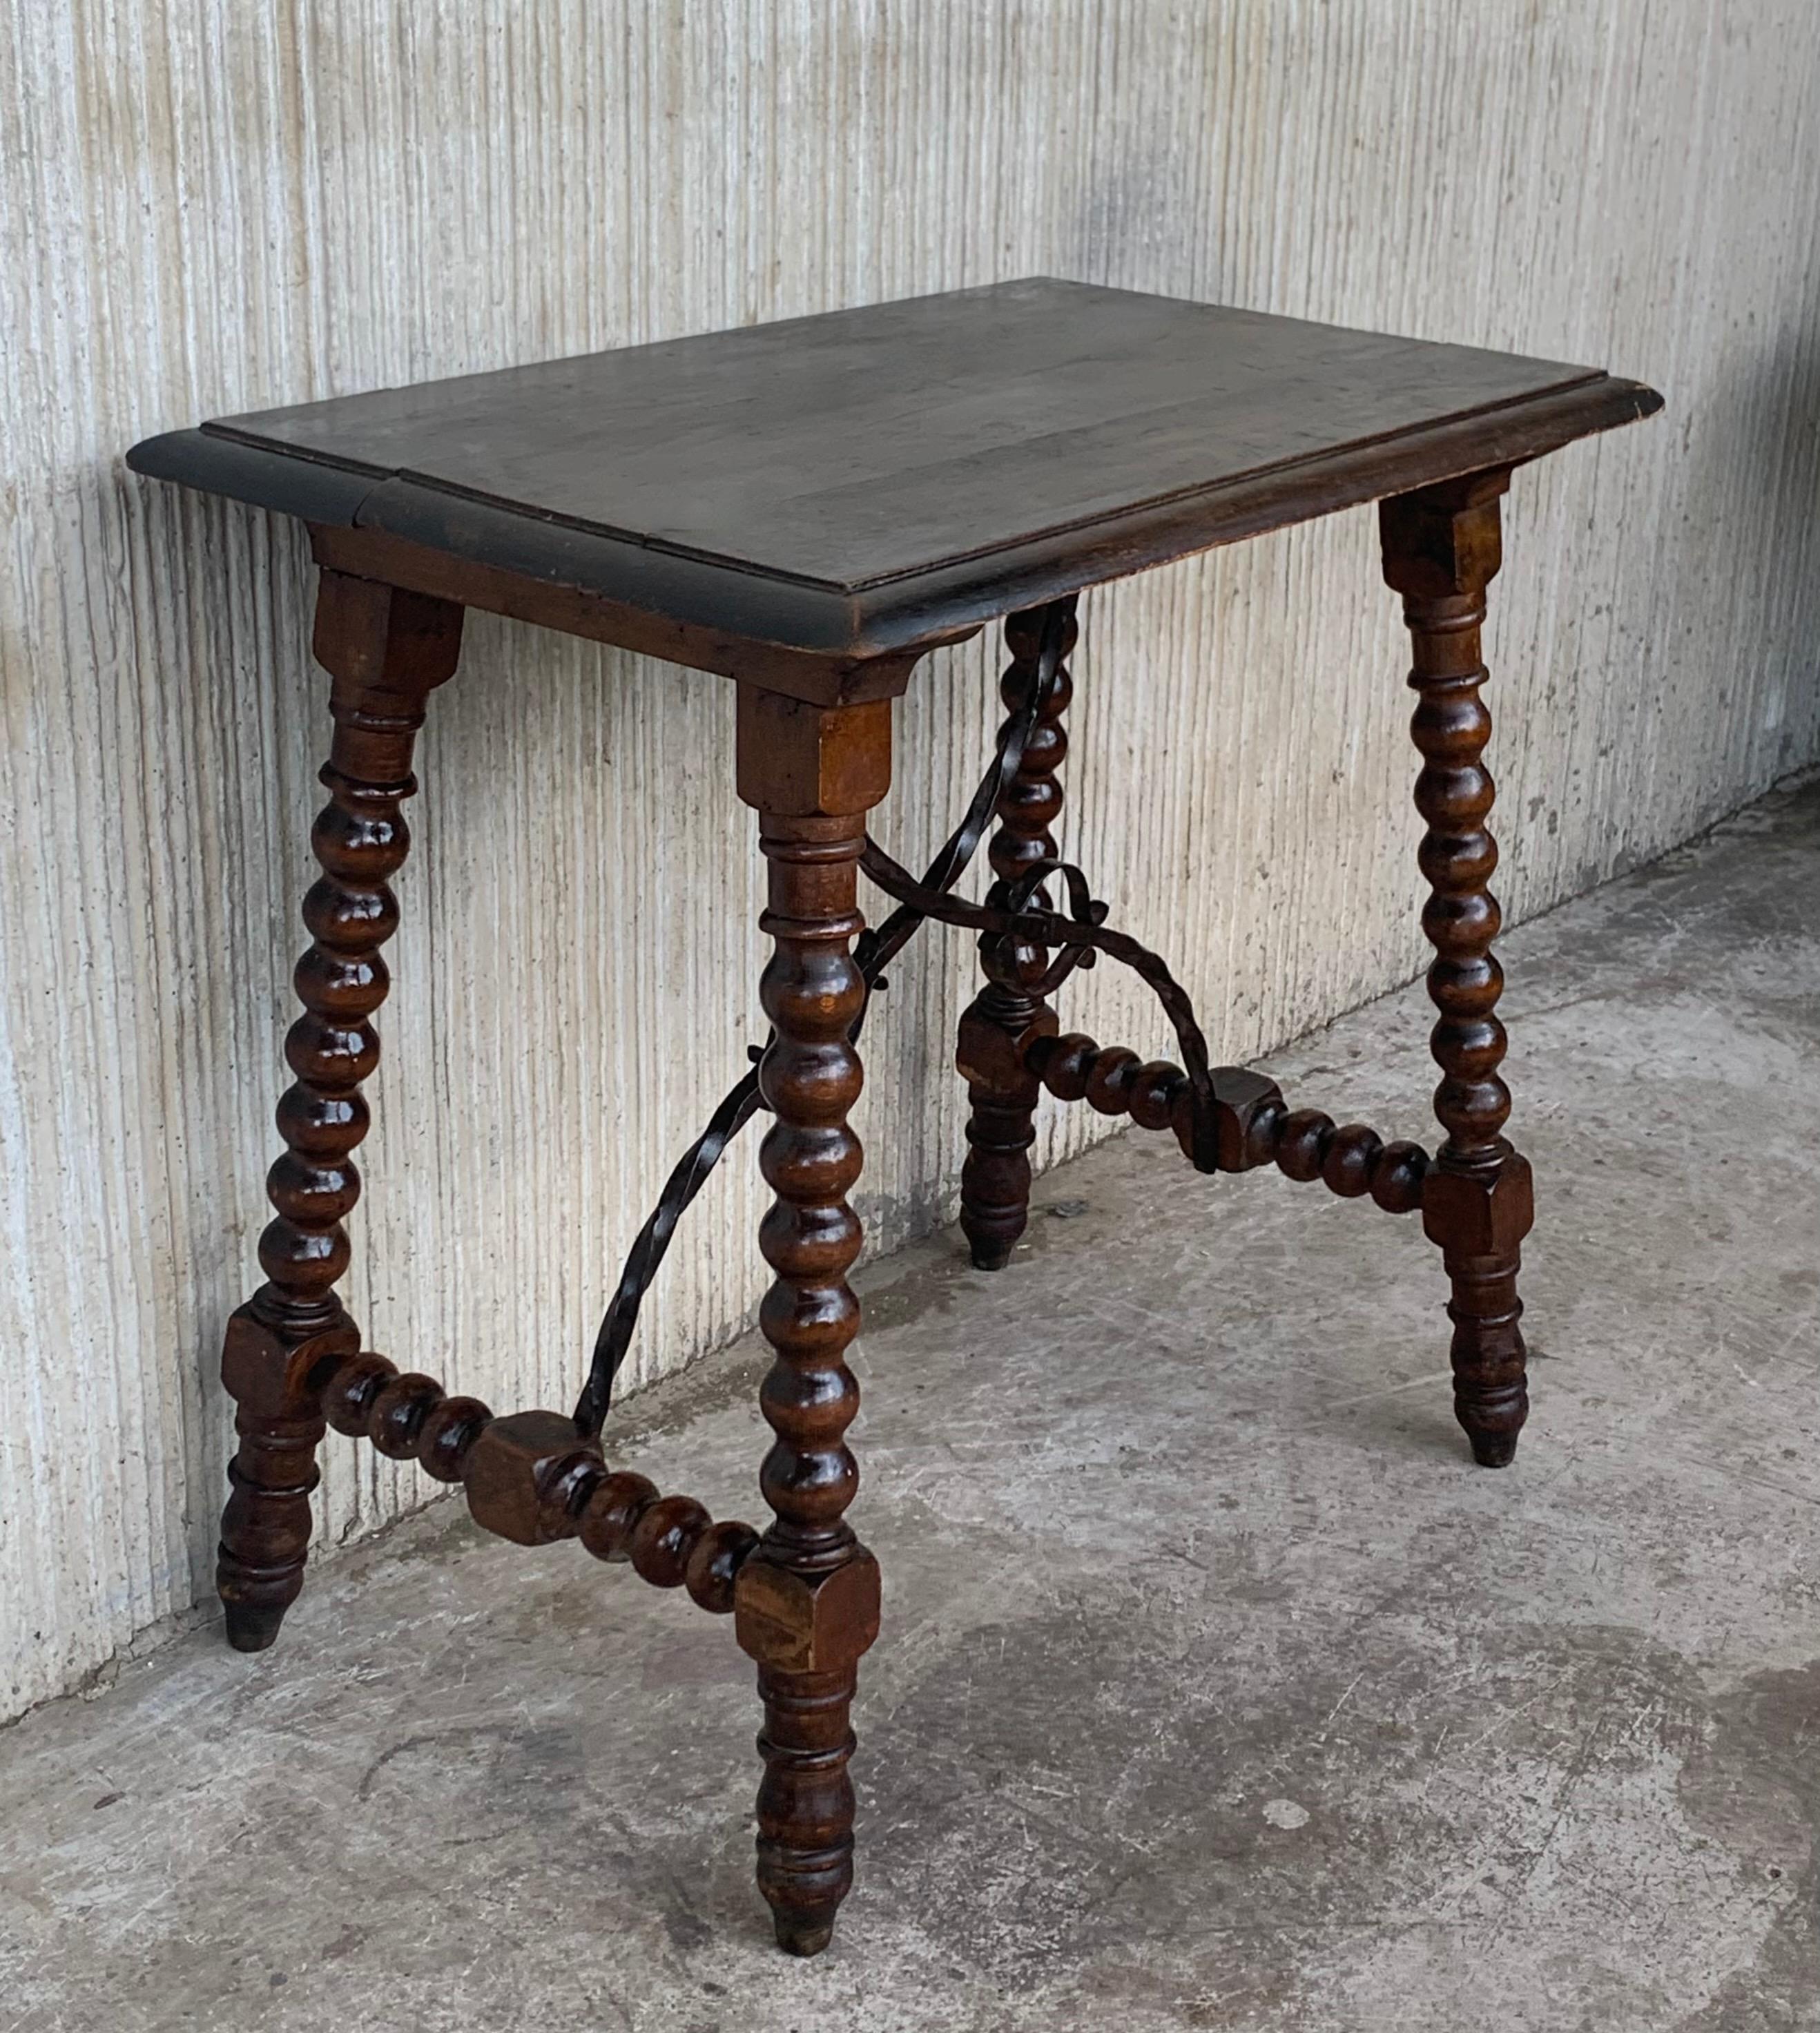 Carved 19th Spanish Walnut Side Table with Lyre Legs, Beleveled Top and Iron Stretcher For Sale